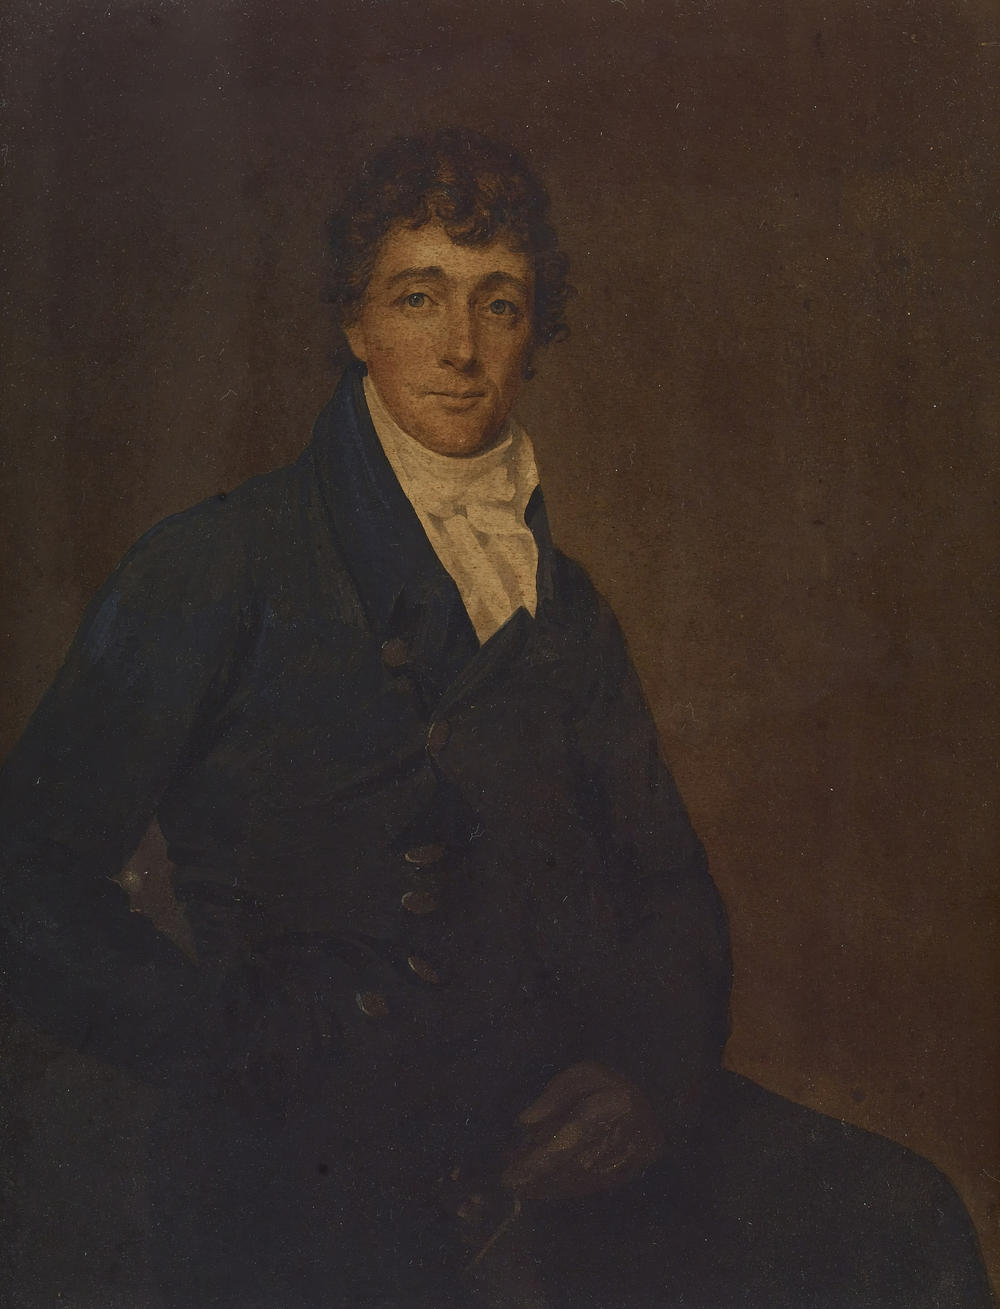 Francis Scott Key (1779-1830) was a lawyer who wrote 